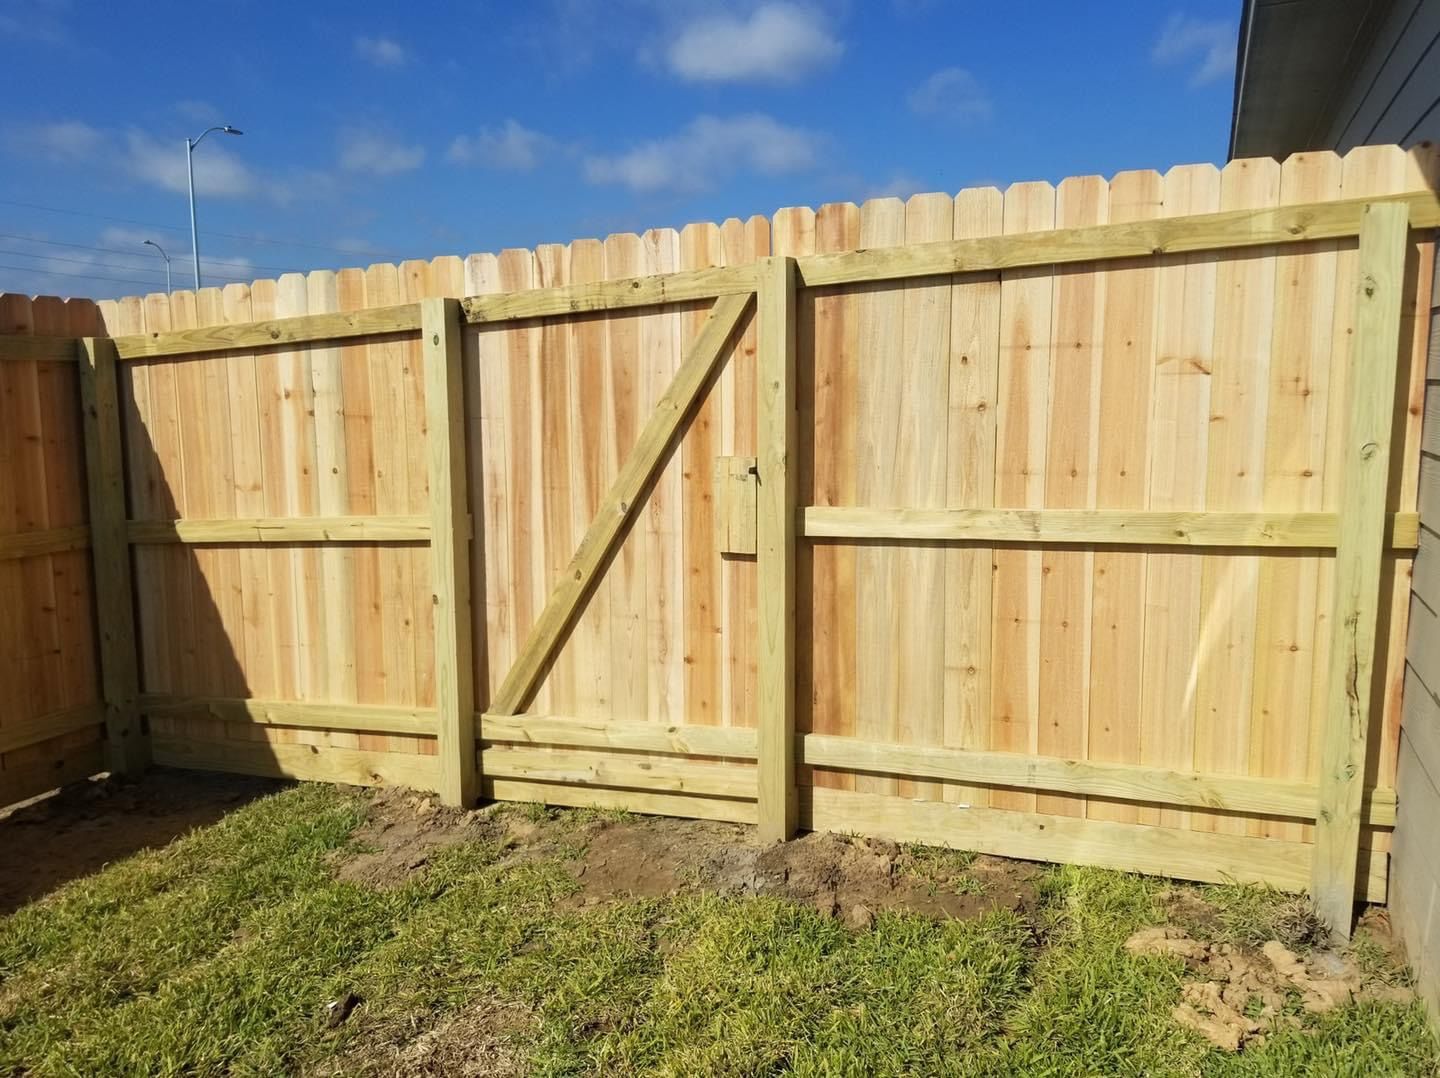 Privacy 3 Rail Cedar Fencing for Pride Of Texas Fence Company in Brookshire, TX